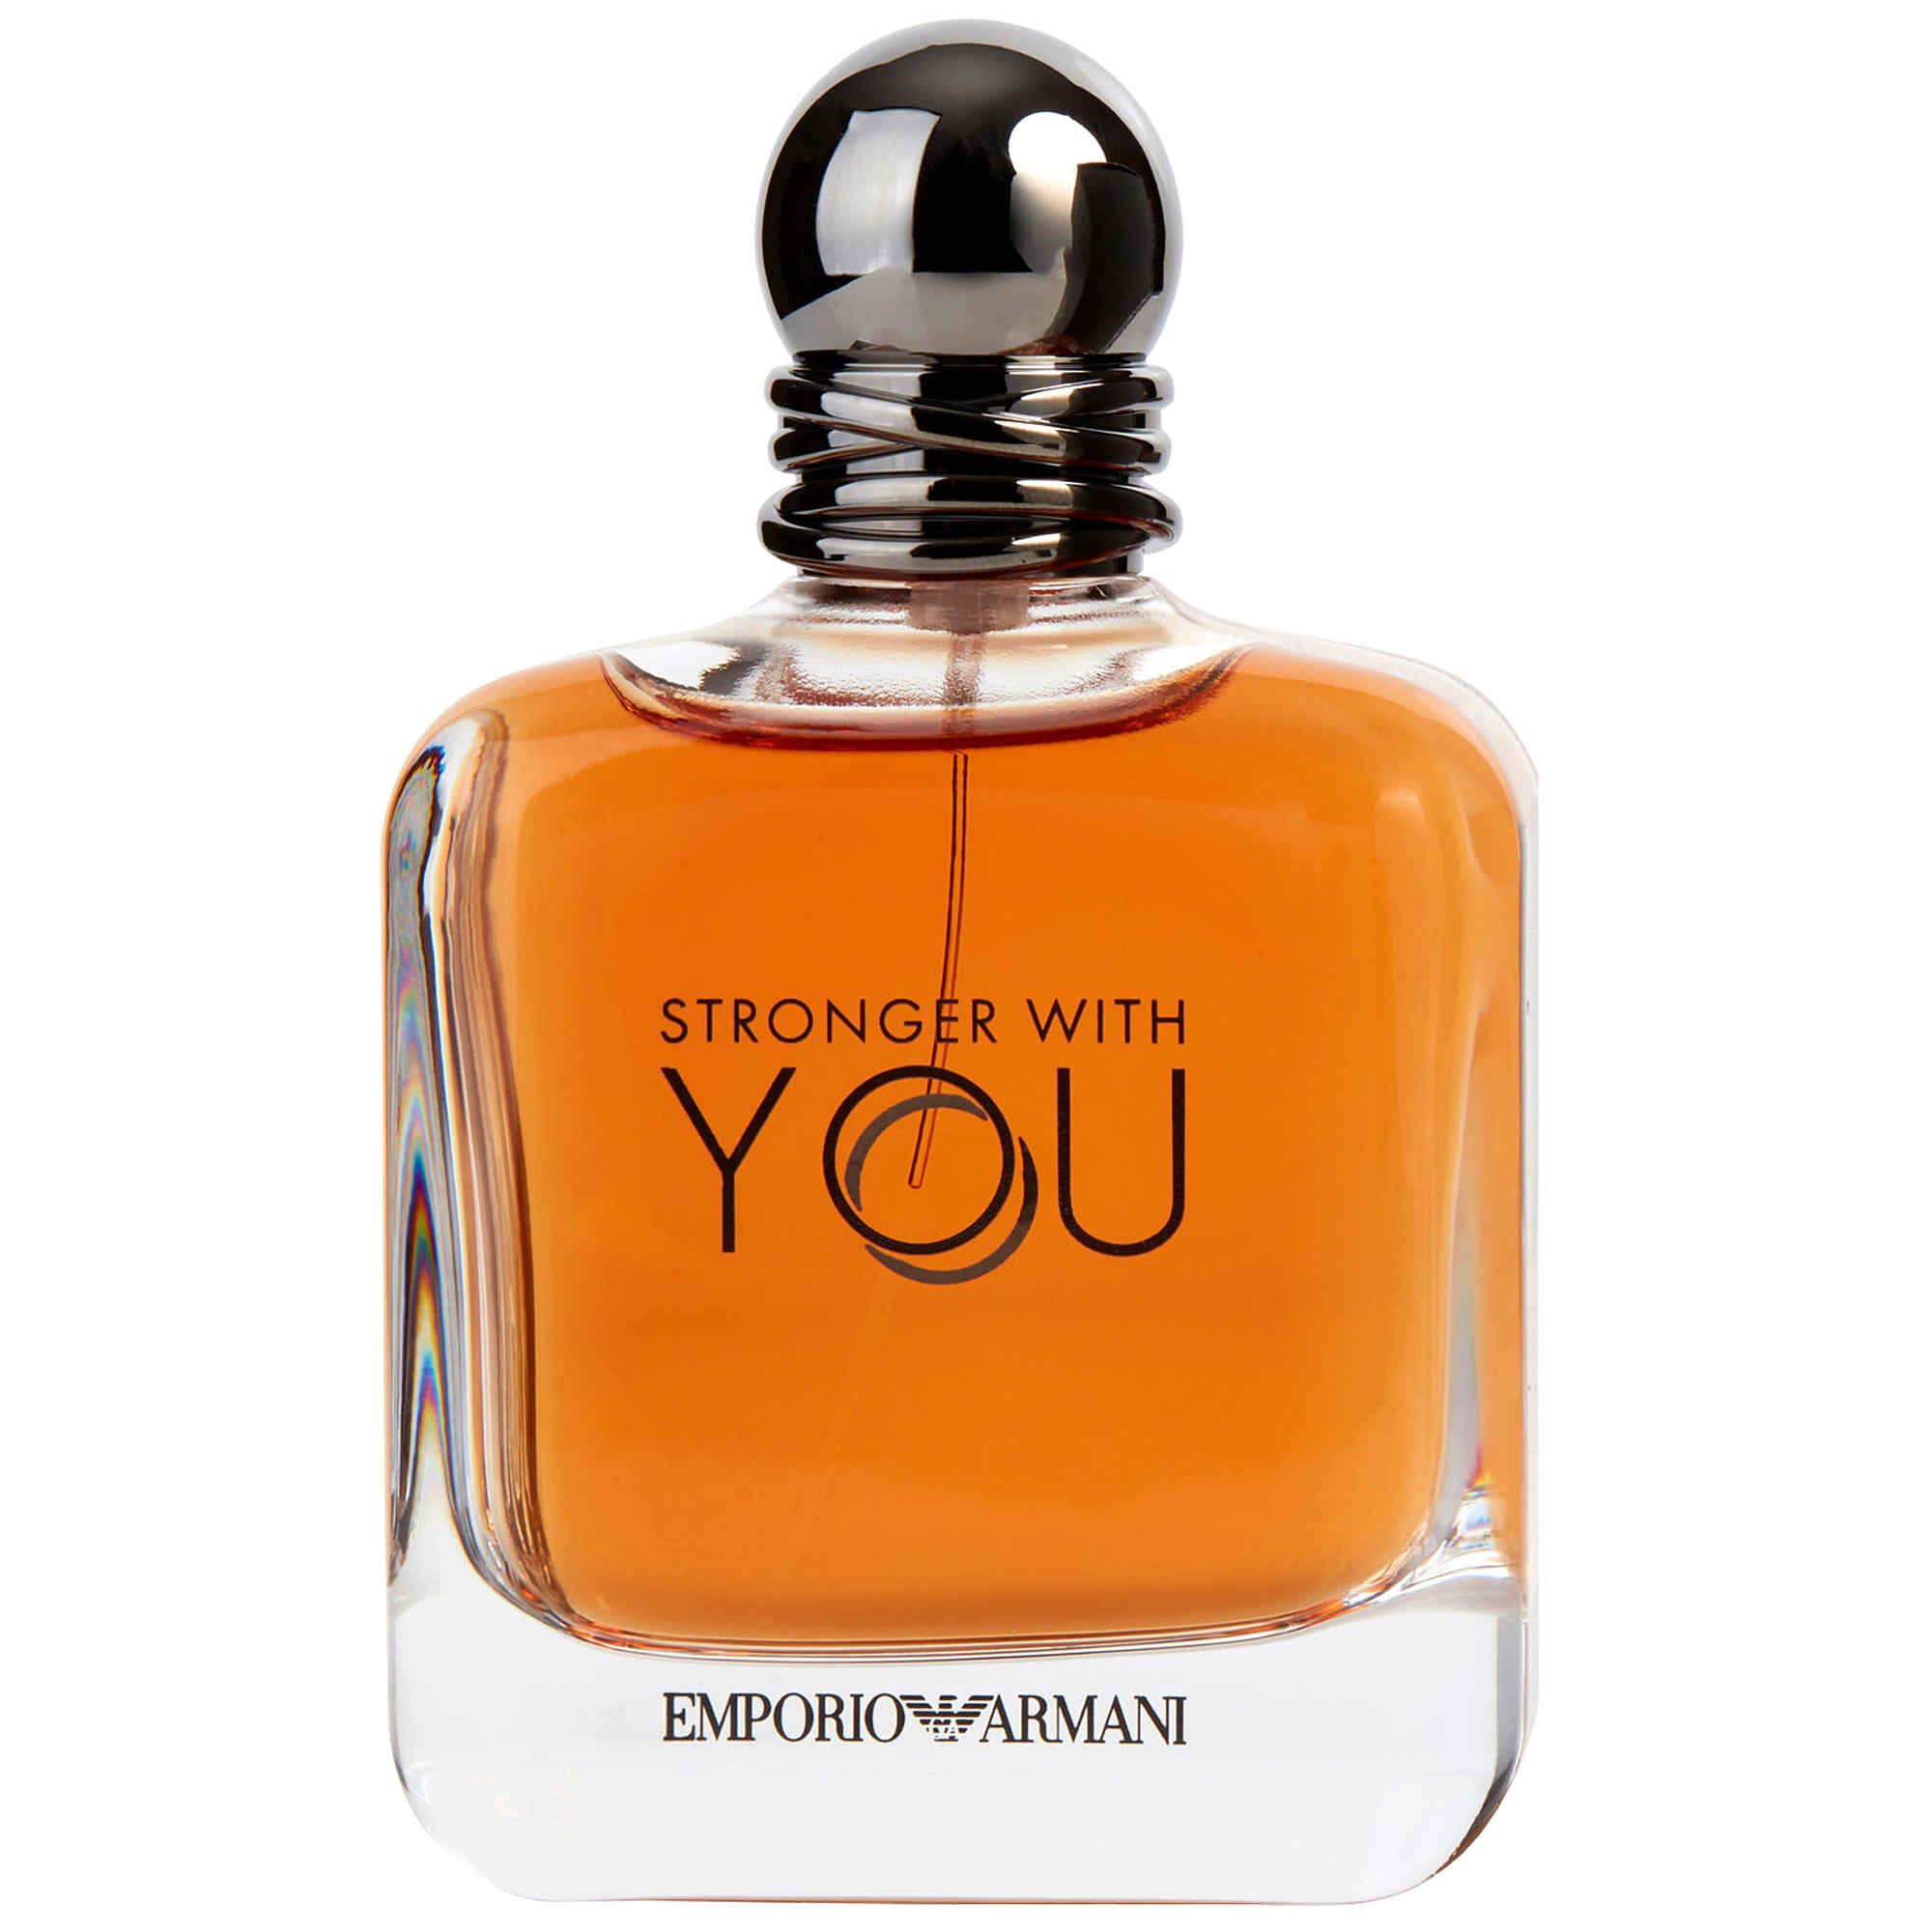 Stronger With You by Emporio Armani Fragrance Samples | DecantX | Eau de Toilette Scent Sampler and Size Perfume Atomizer